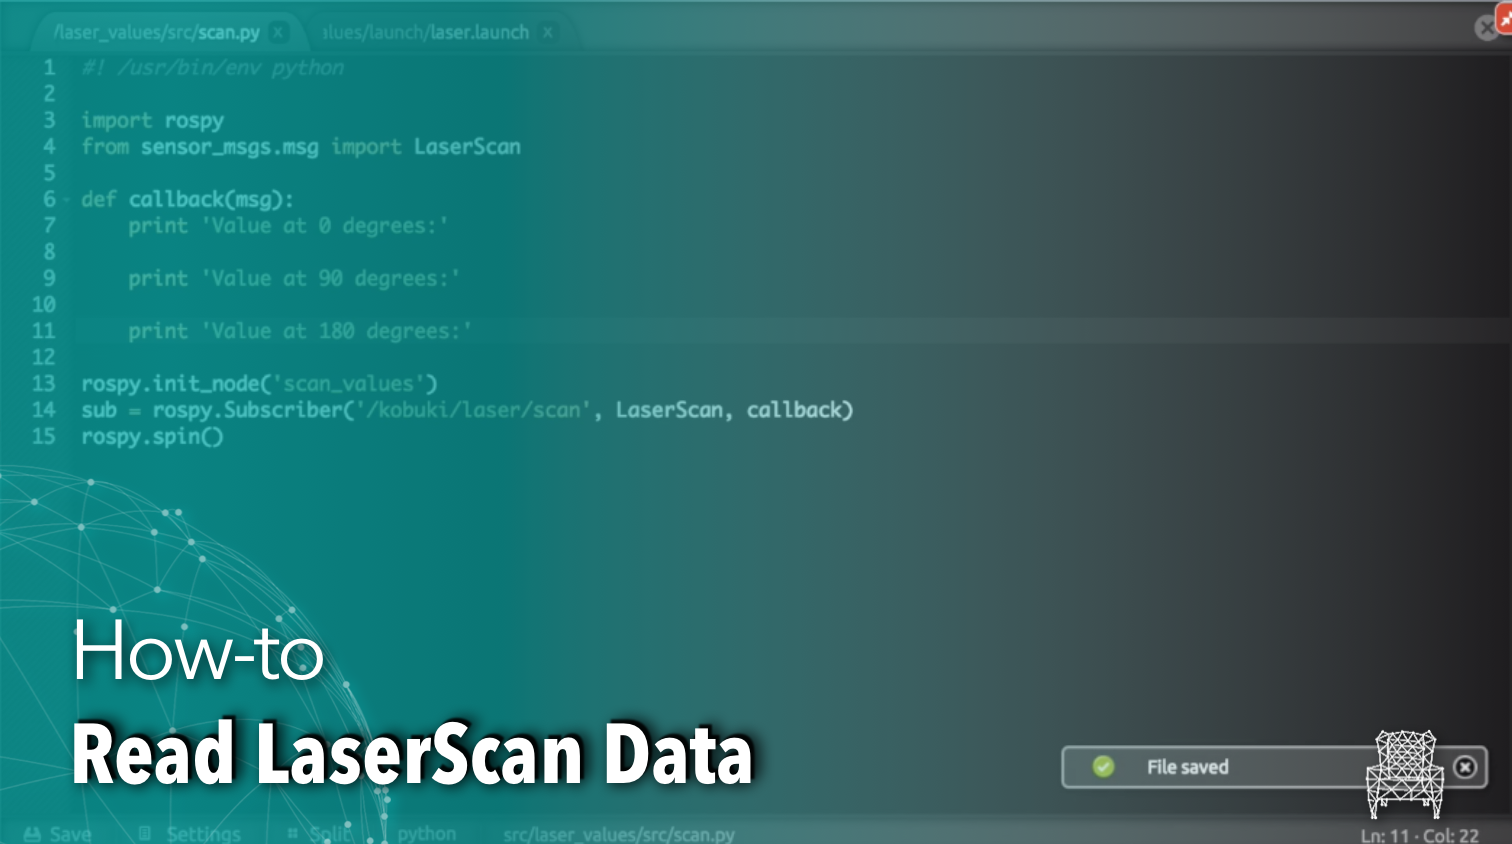 How to read LaserScan data ros python